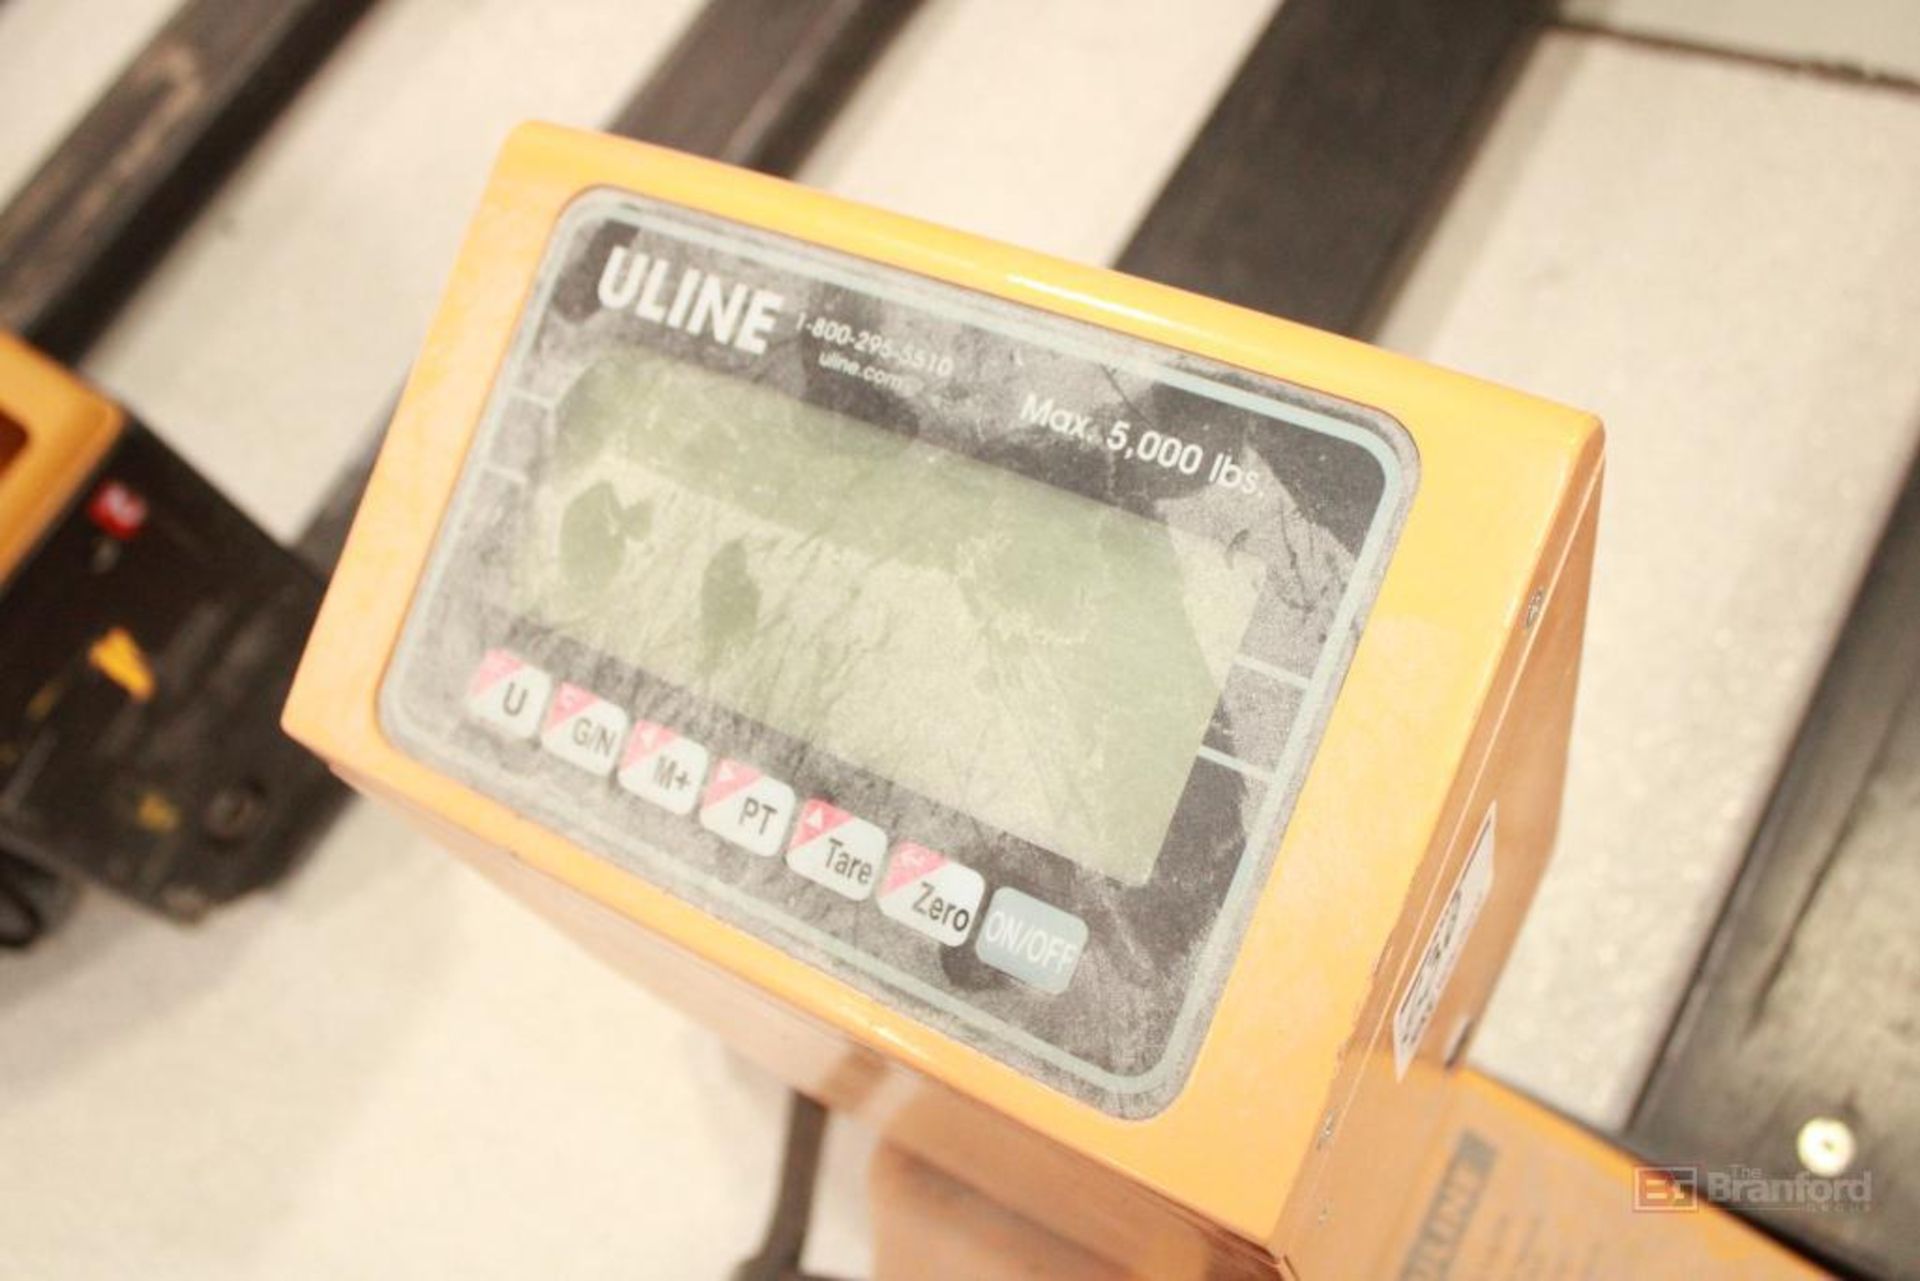 Uline Pallet Truck Scale - Image 2 of 2